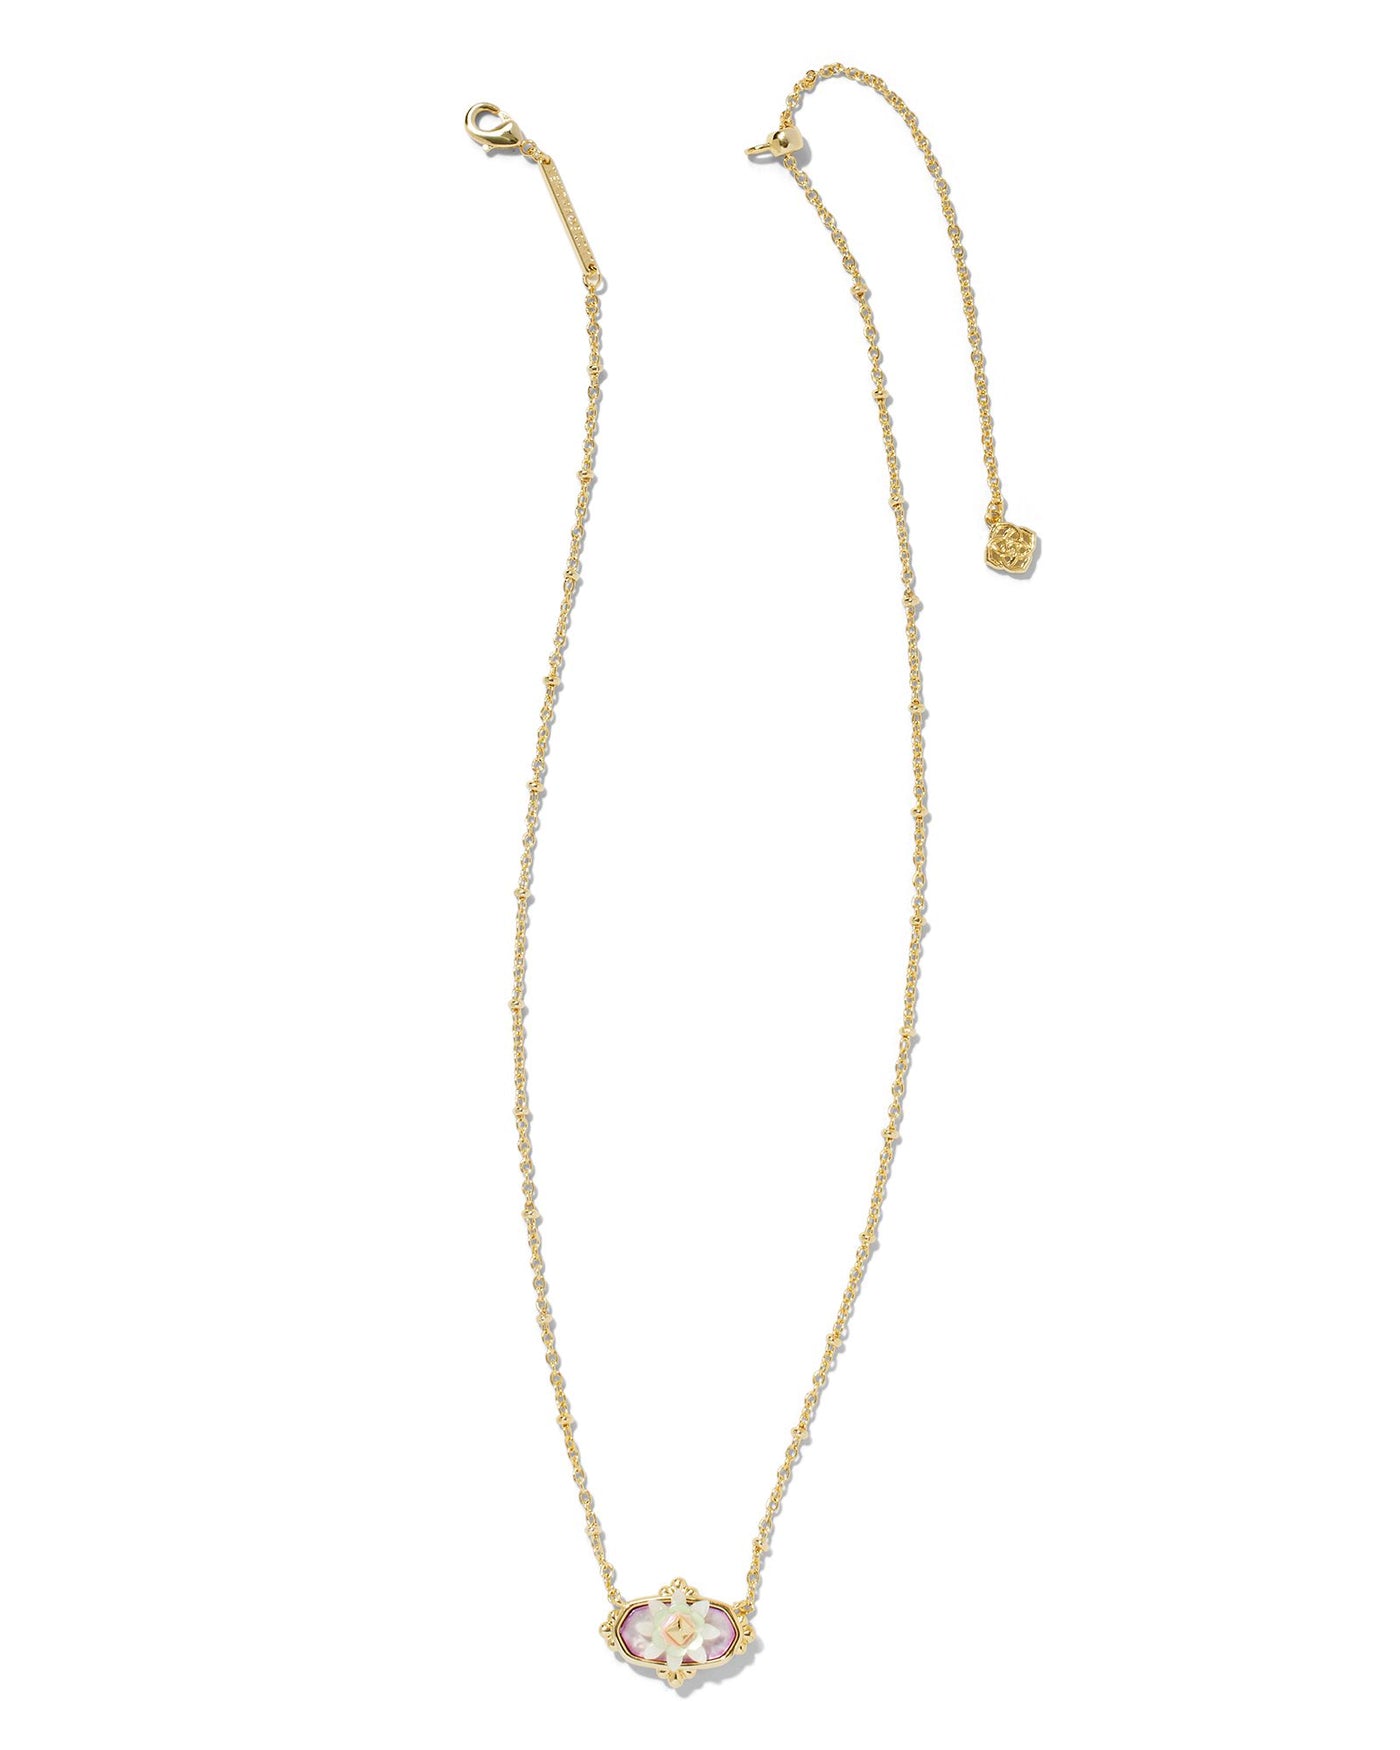 Kendra Scott Elisa Flower Petal Framed Short Pendant Necklace-Necklaces-Kendra Scott-Market Street Nest, Fashionable Clothing, Shoes and Home Décor Located in Mabank, TX